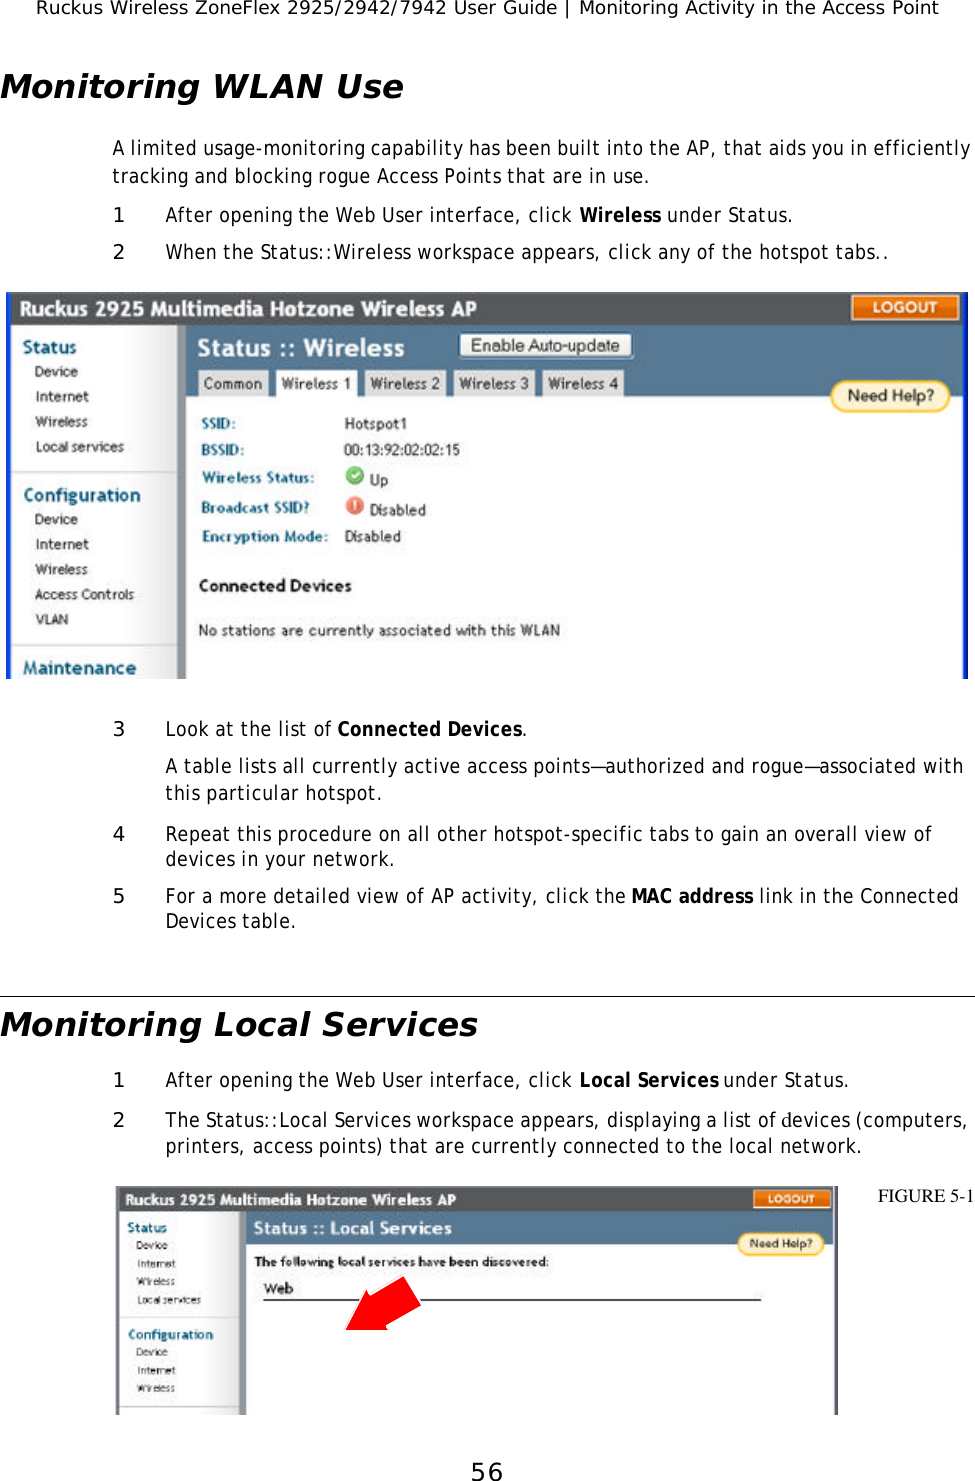 Ruckus Wireless ZoneFlex 2925/2942/7942 User Guide | Monitoring Activity in the Access Point56Monitoring WLAN UseA limited usage-monitoring capability has been built into the AP, that aids you in efficiently tracking and blocking rogue Access Points that are in use.1After opening the Web User interface, click Wireless under Status.2When the Status::Wireless workspace appears, click any of the hotspot tabs..3Look at the list of Connected Devices.A table lists all currently active access points—authorized and rogue—associated with this particular hotspot.4Repeat this procedure on all other hotspot-specific tabs to gain an overall view of devices in your network.5For a more detailed view of AP activity, click the MAC address link in the Connected Devices table. Monitoring Local Services1After opening the Web User interface, click Local Services under Status.2The Status::Local Services workspace appears, displaying a list of devices (computers, printers, access points) that are currently connected to the local network. FIGURE 5-1